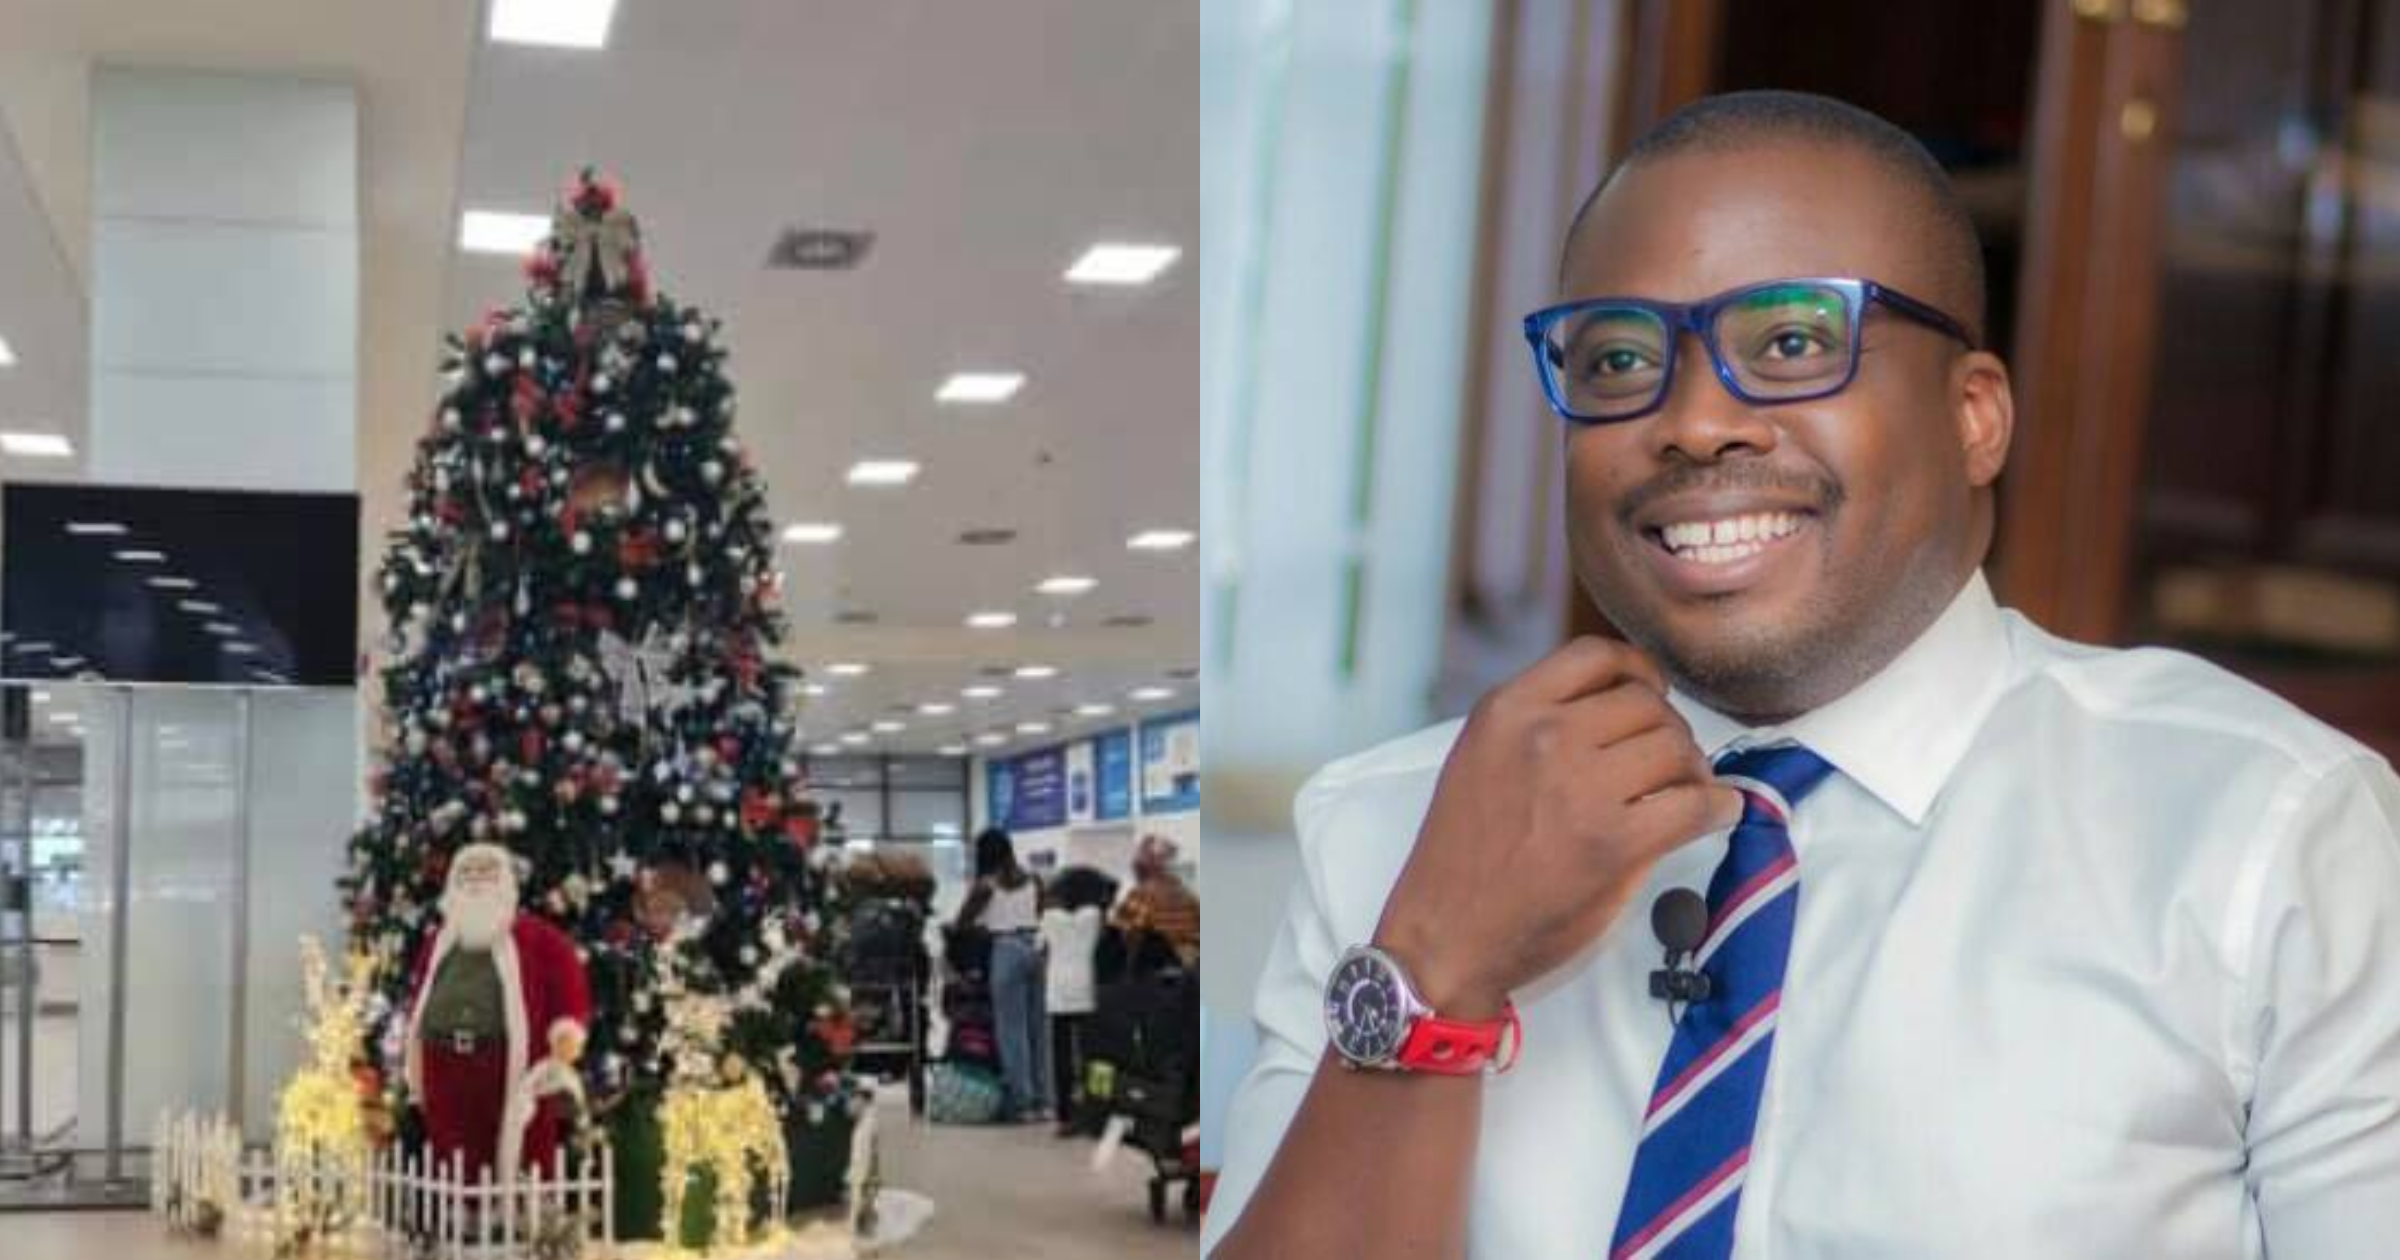 Beautiful Christmas trees at airport cost GHC34k not GHC84k - Paul Adom Otchere